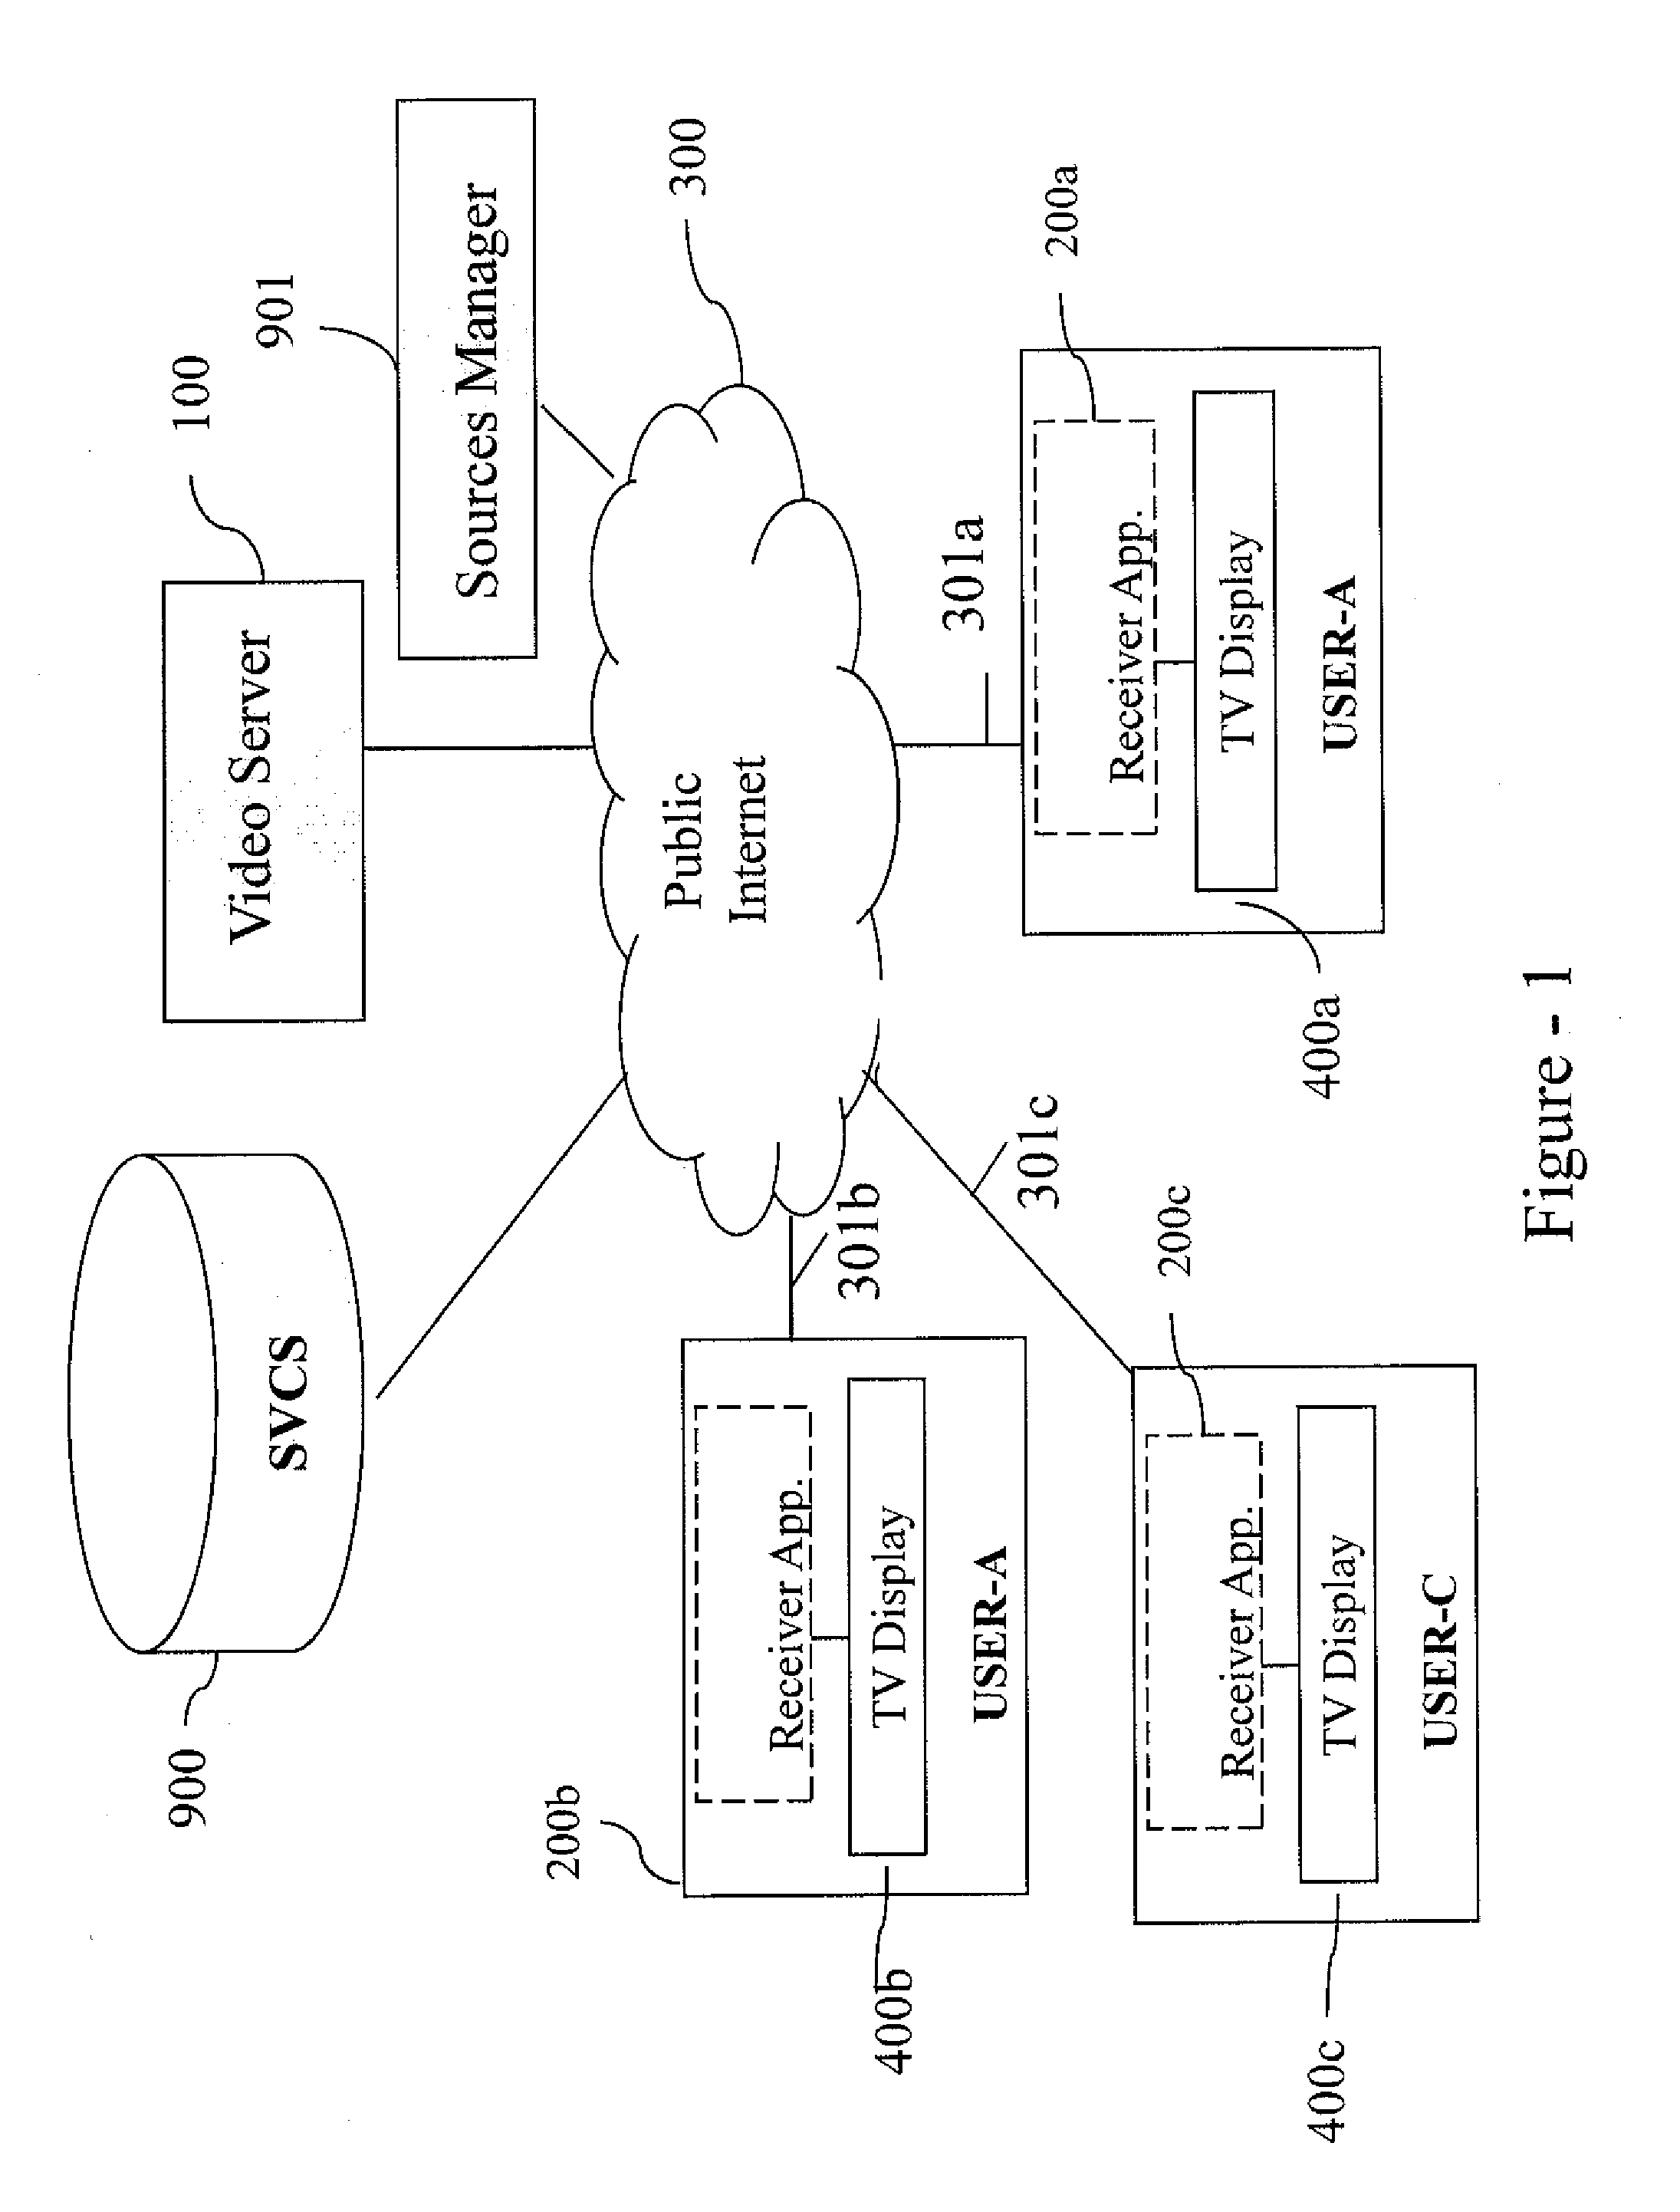 System and method for interactive synchronized video watching